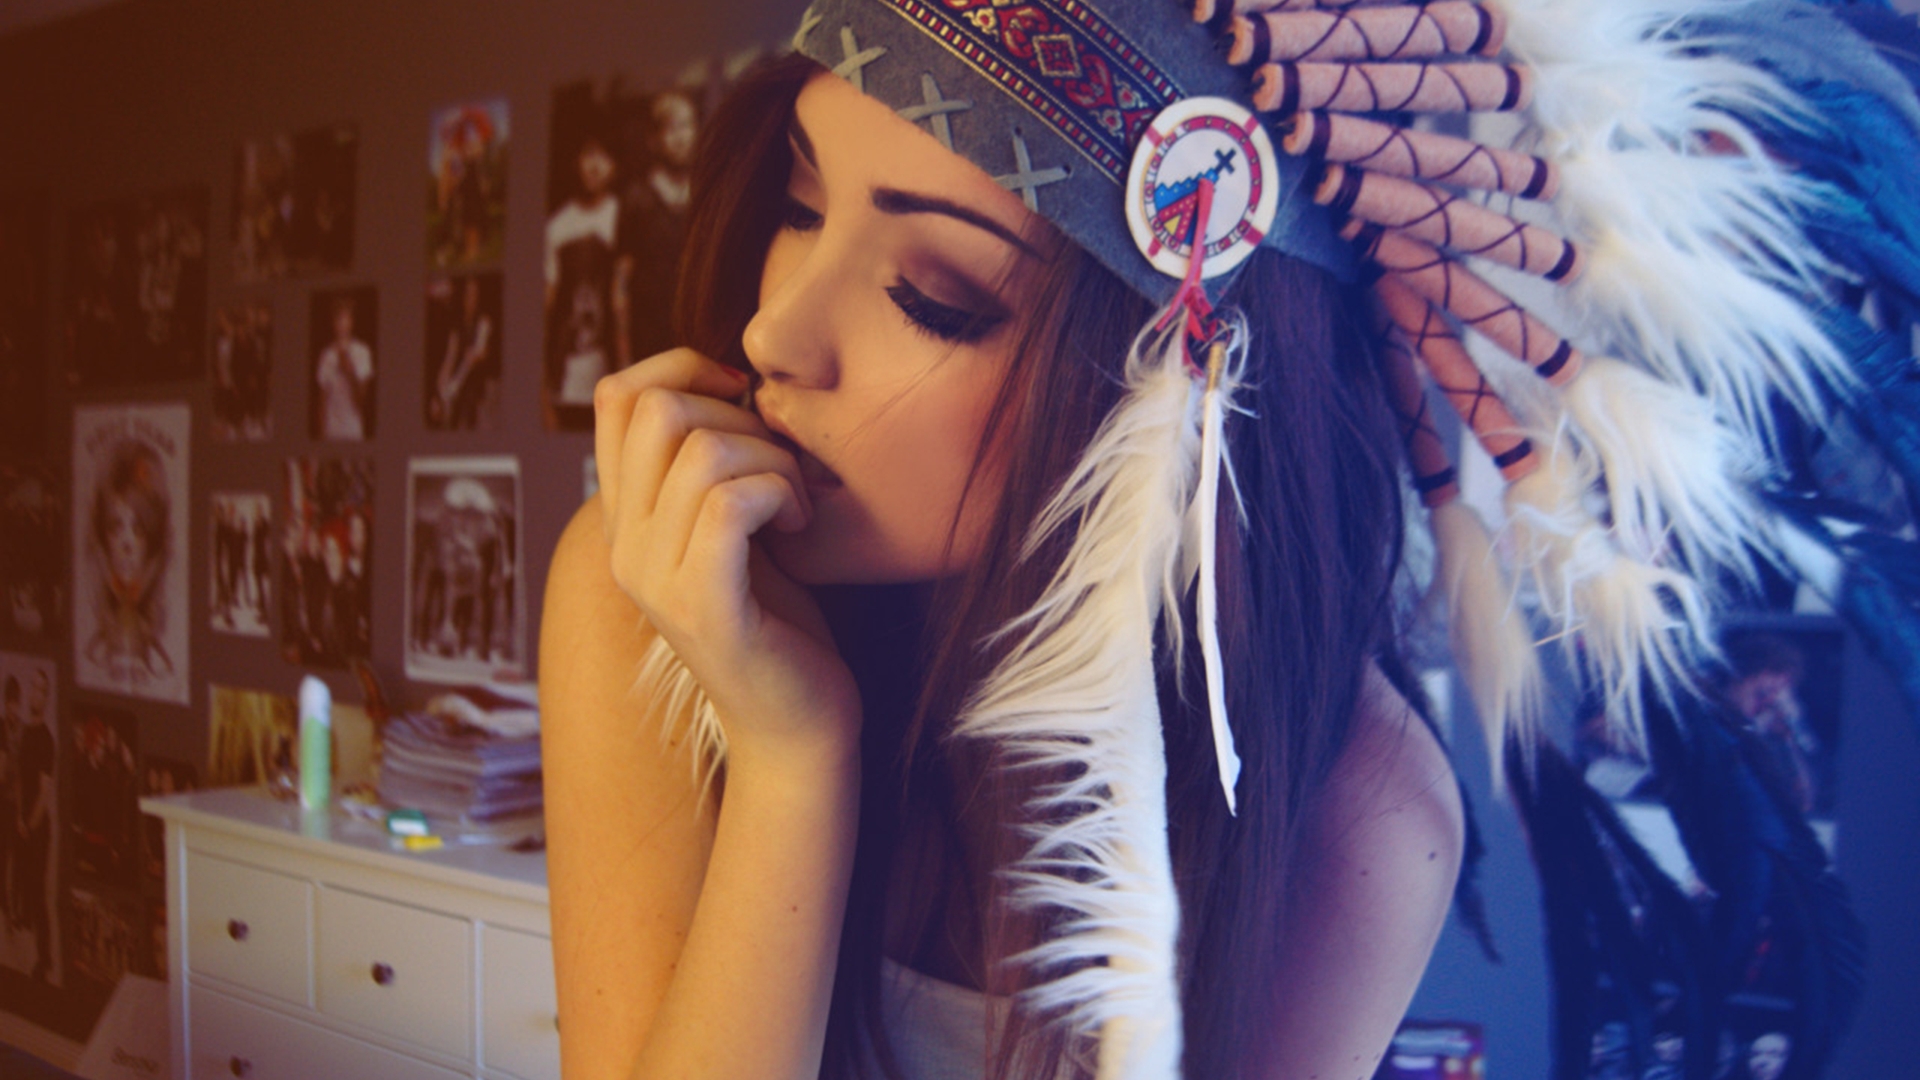 Girl with feathers photo